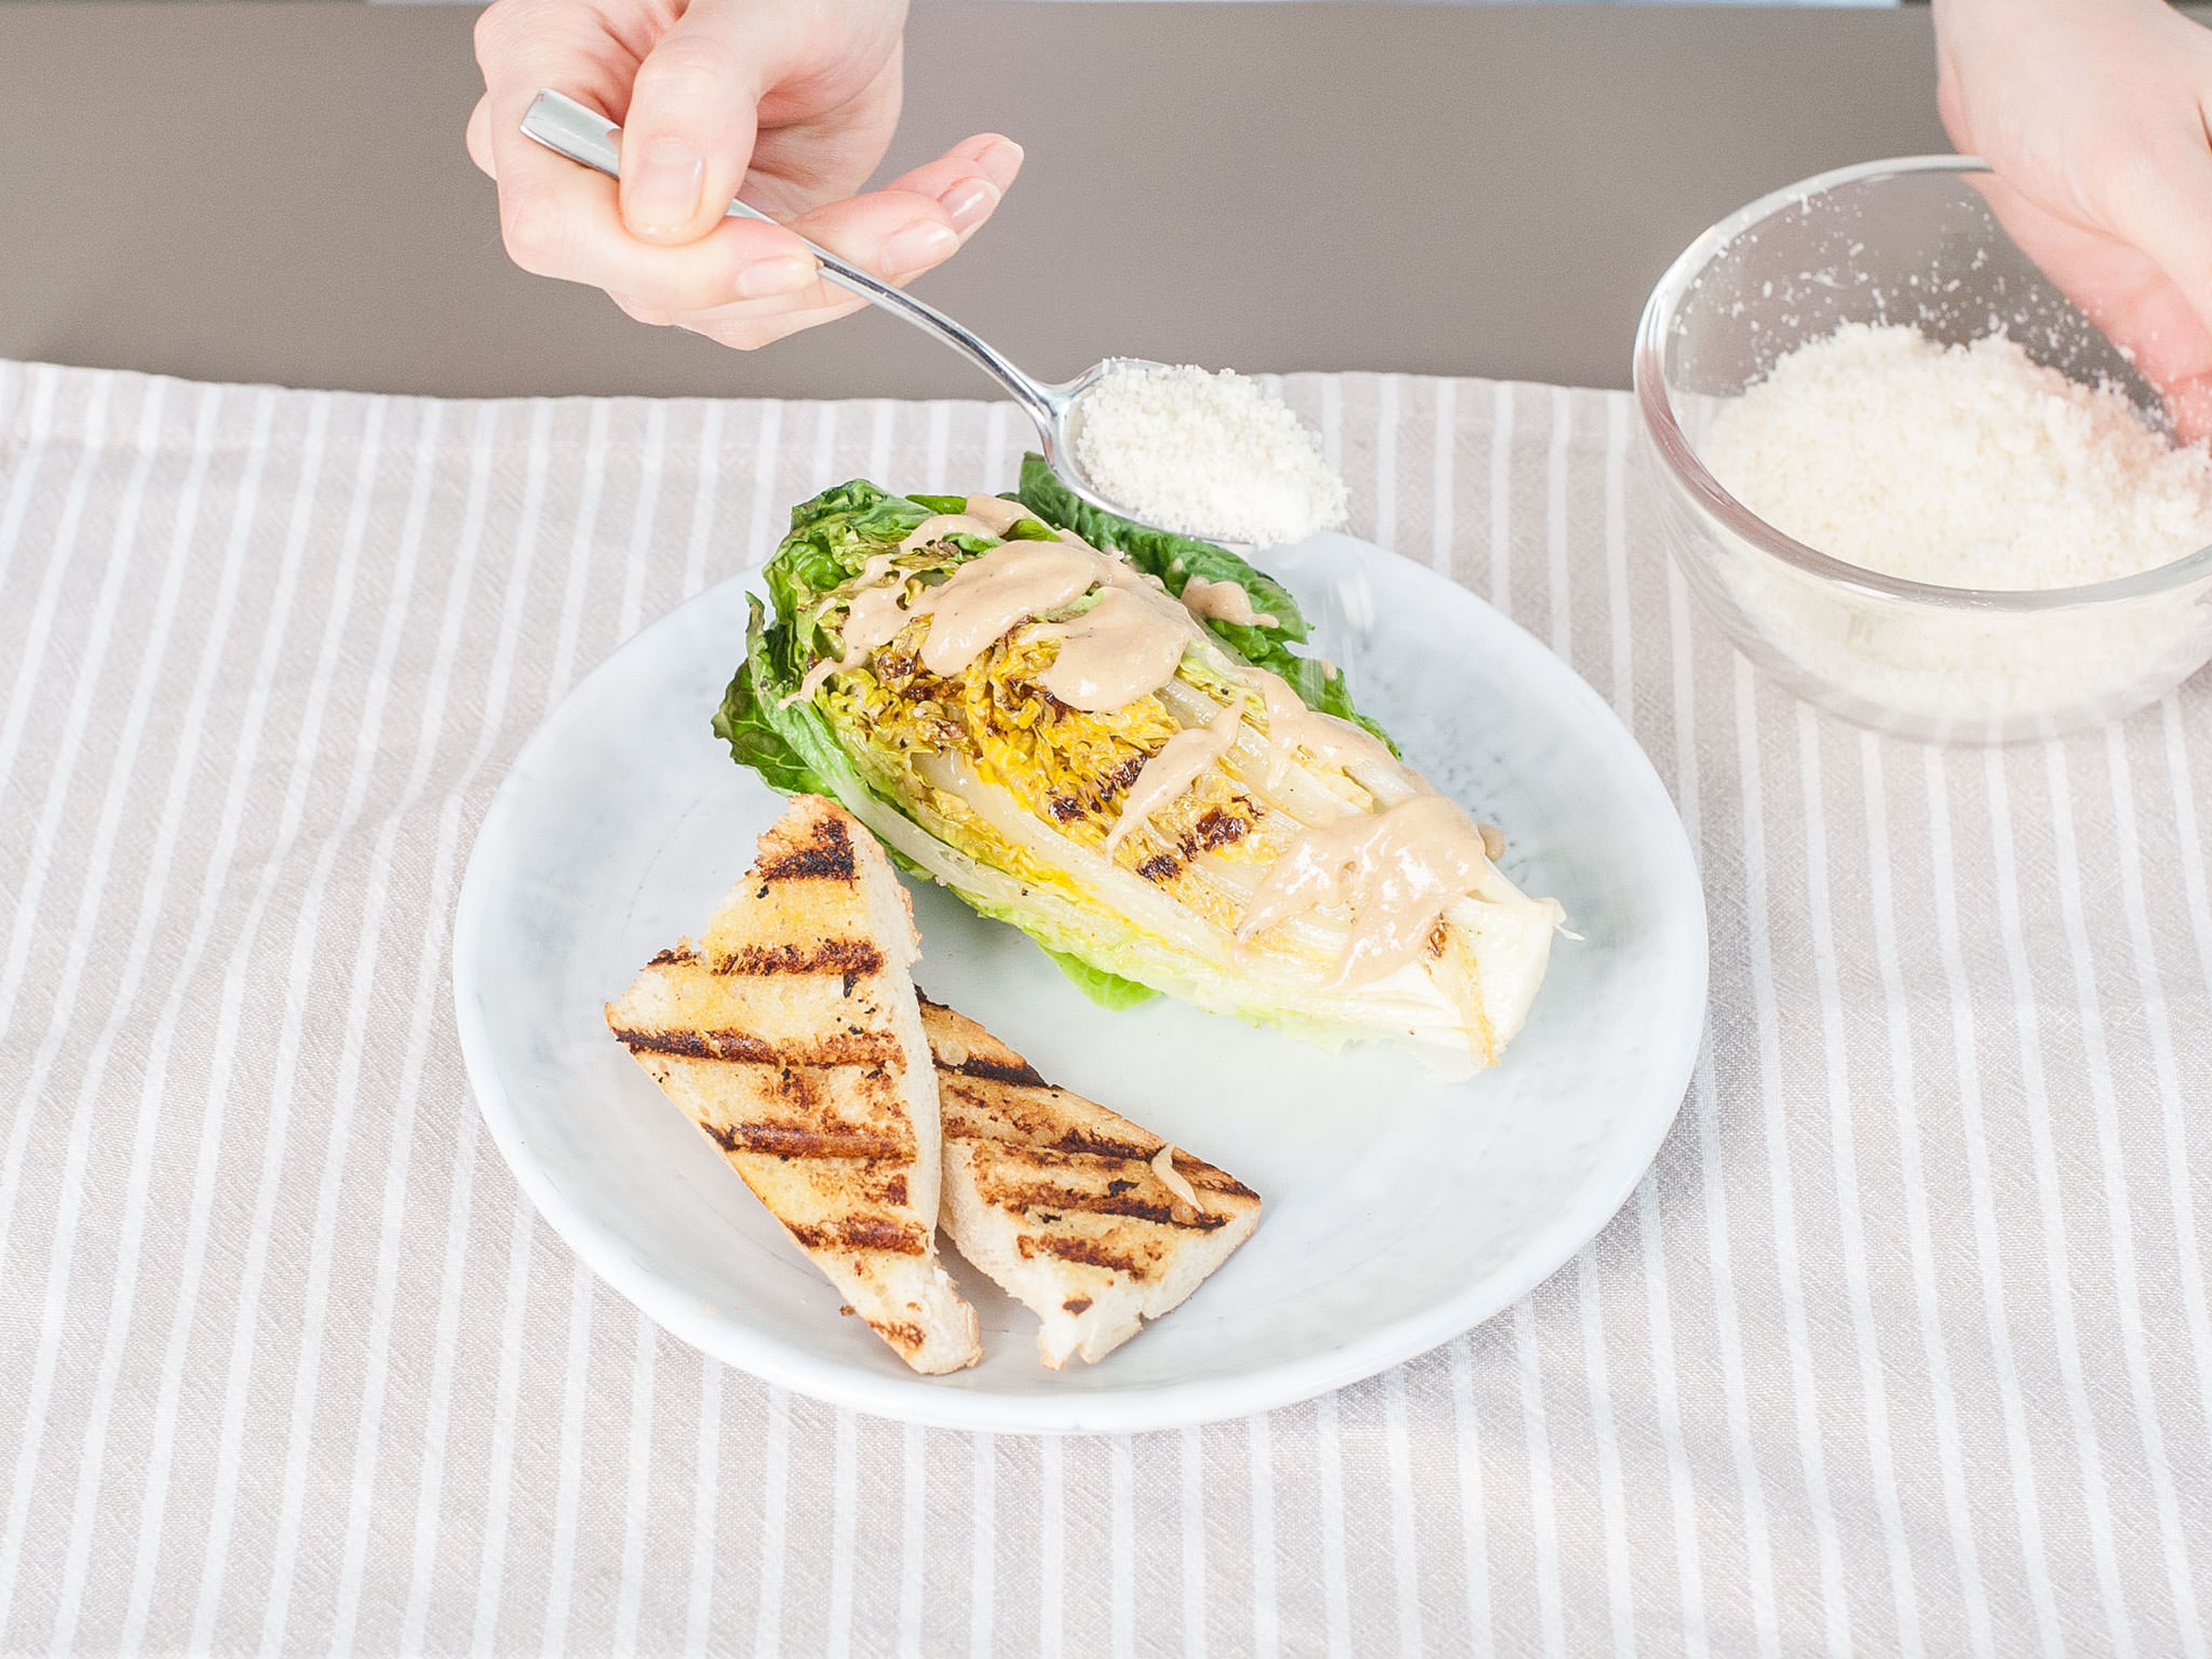 Serve romaine hearts and bread whole or cut into wide strips. Drizzle or toss with Caesar dressing to taste and top with remaining grated Parmesan cheese.